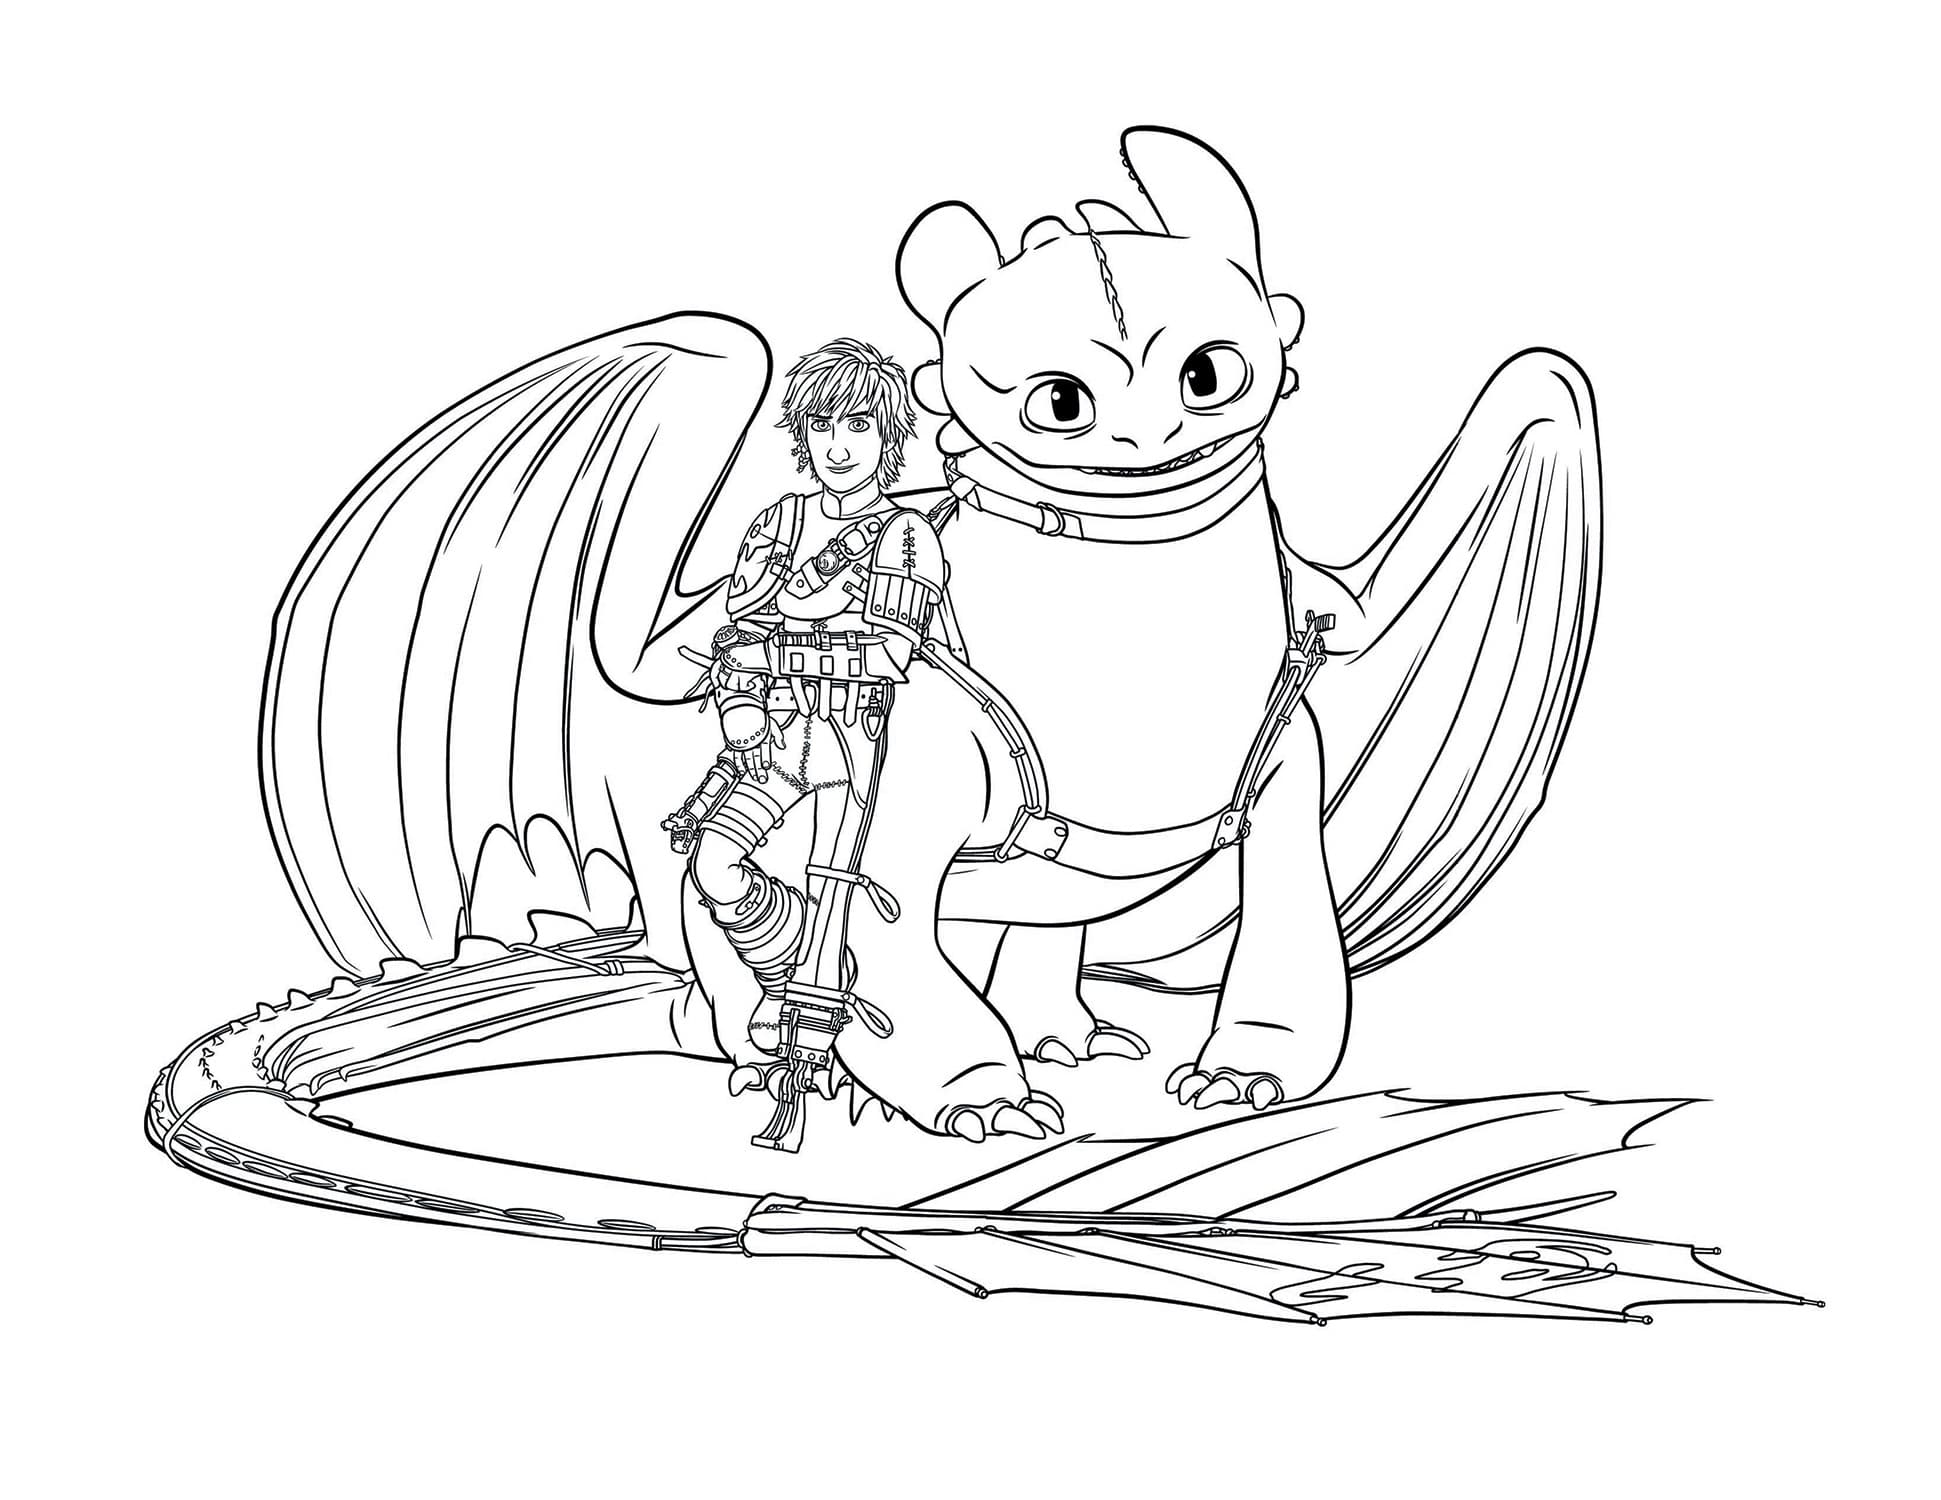 Hiccup and dragon